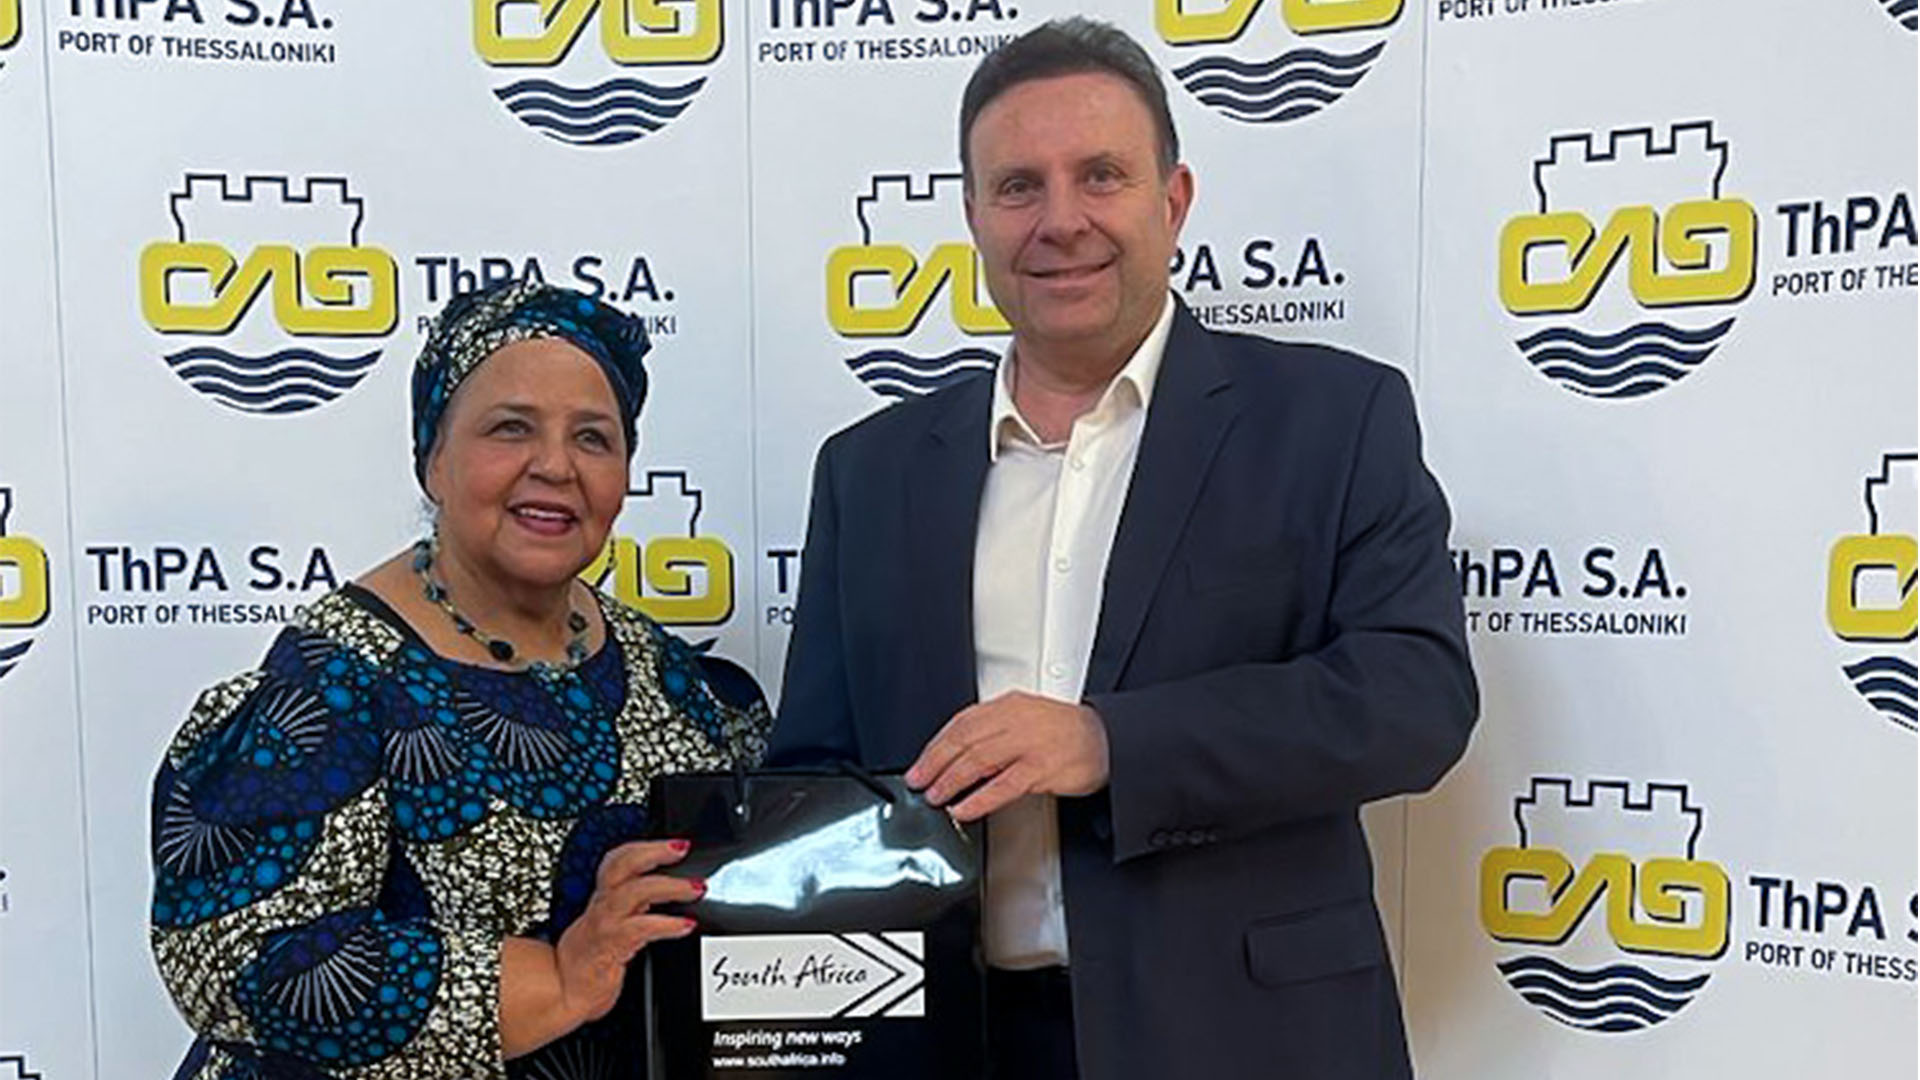 Visit of the Ambassador of South Africa, Beryl Rose Sisulu to ThPA S.A.